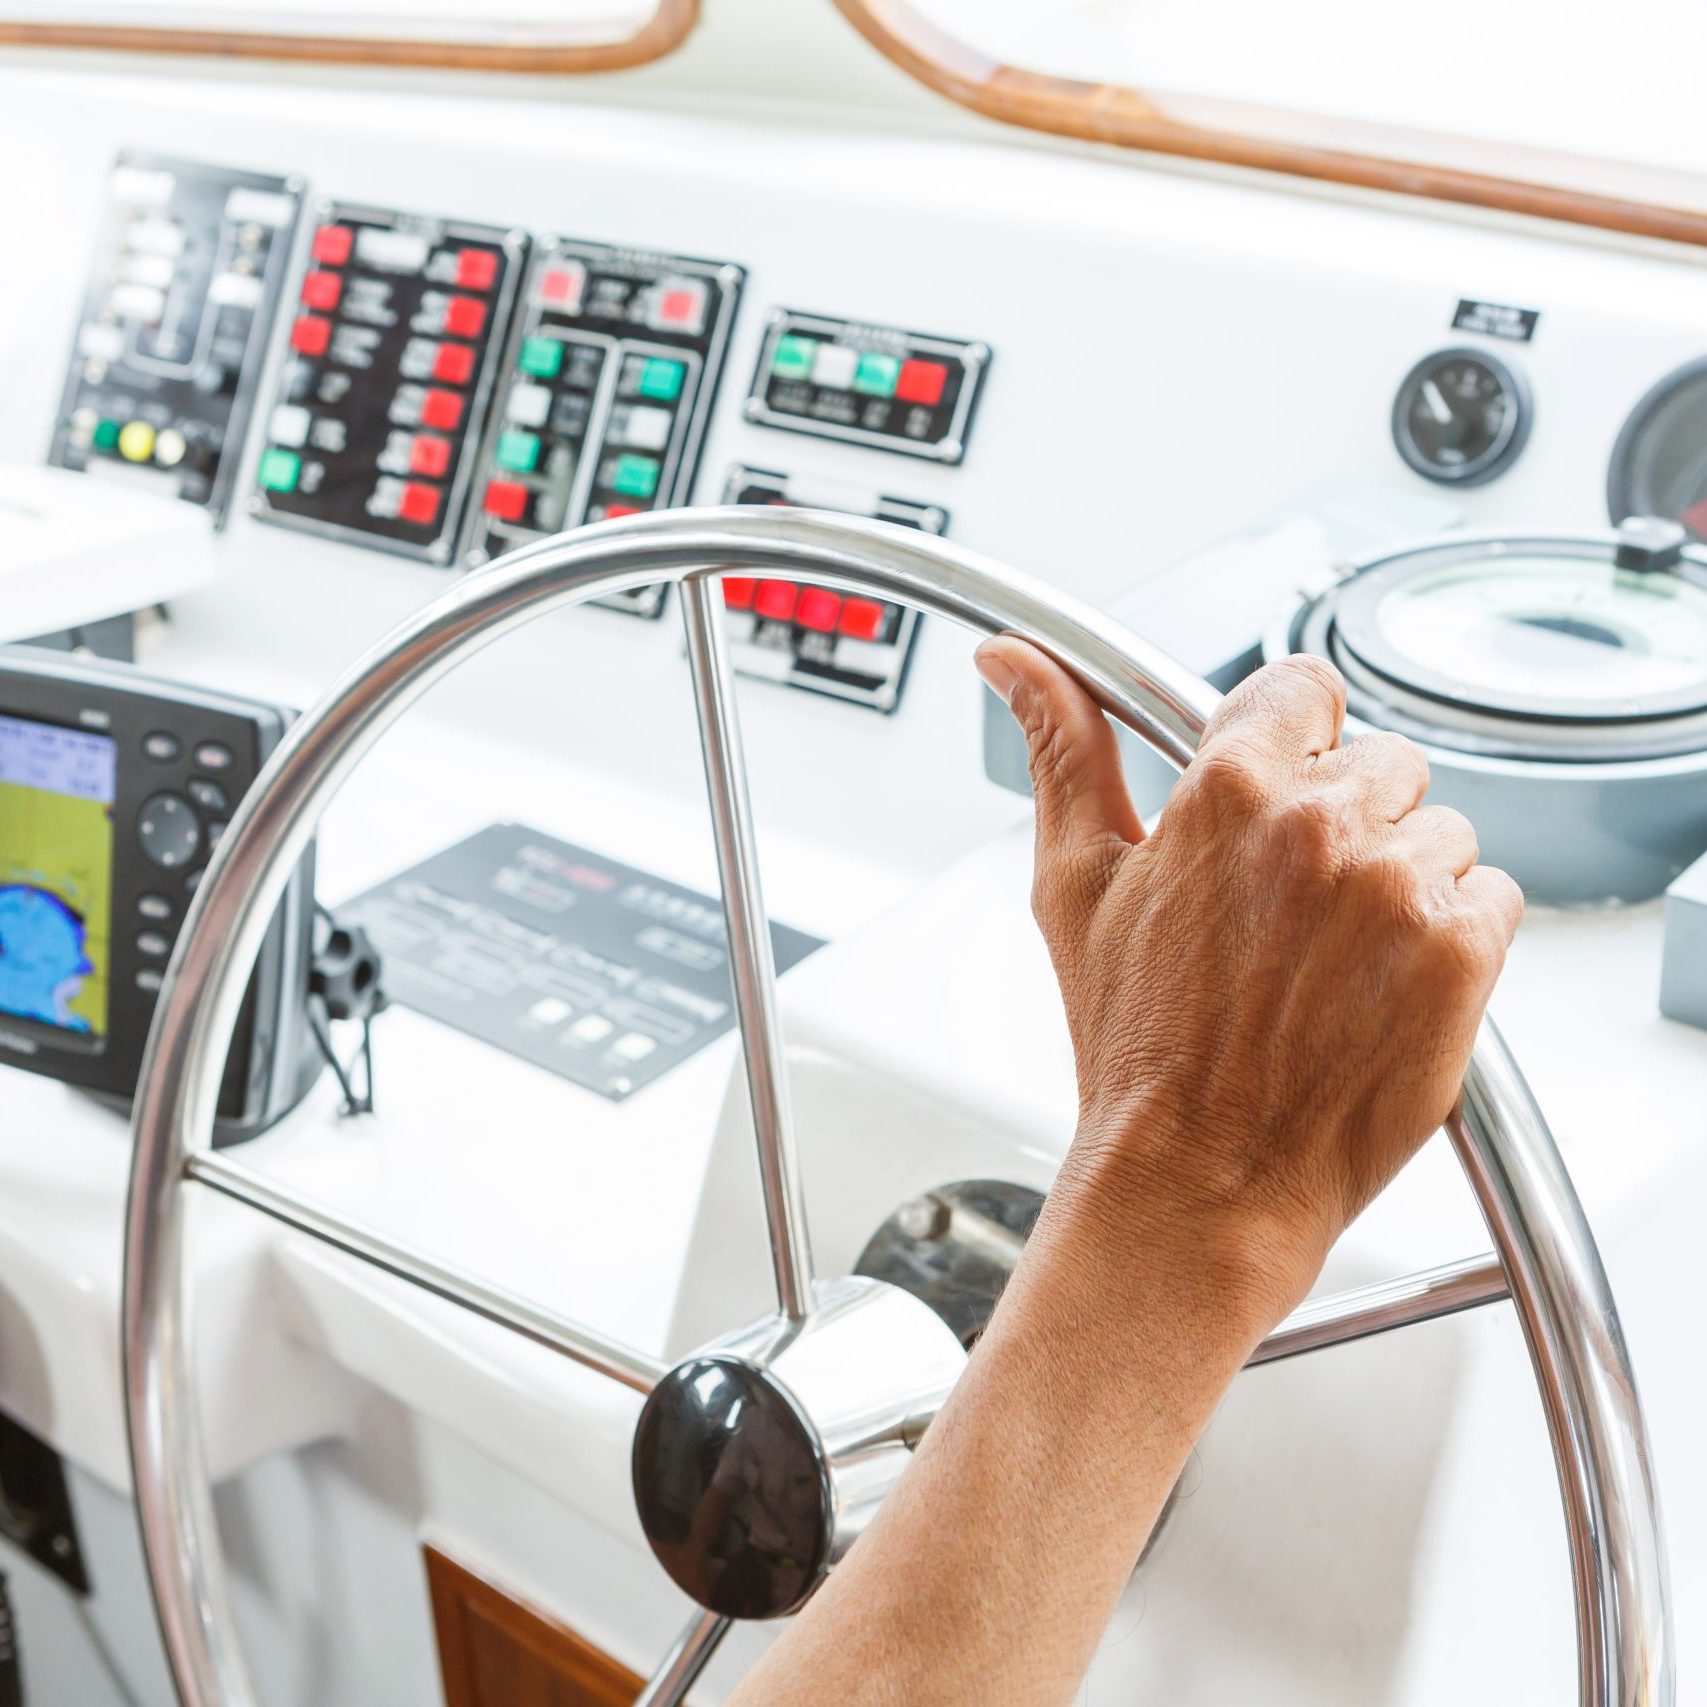 Close up captain hand on boat steering wheel